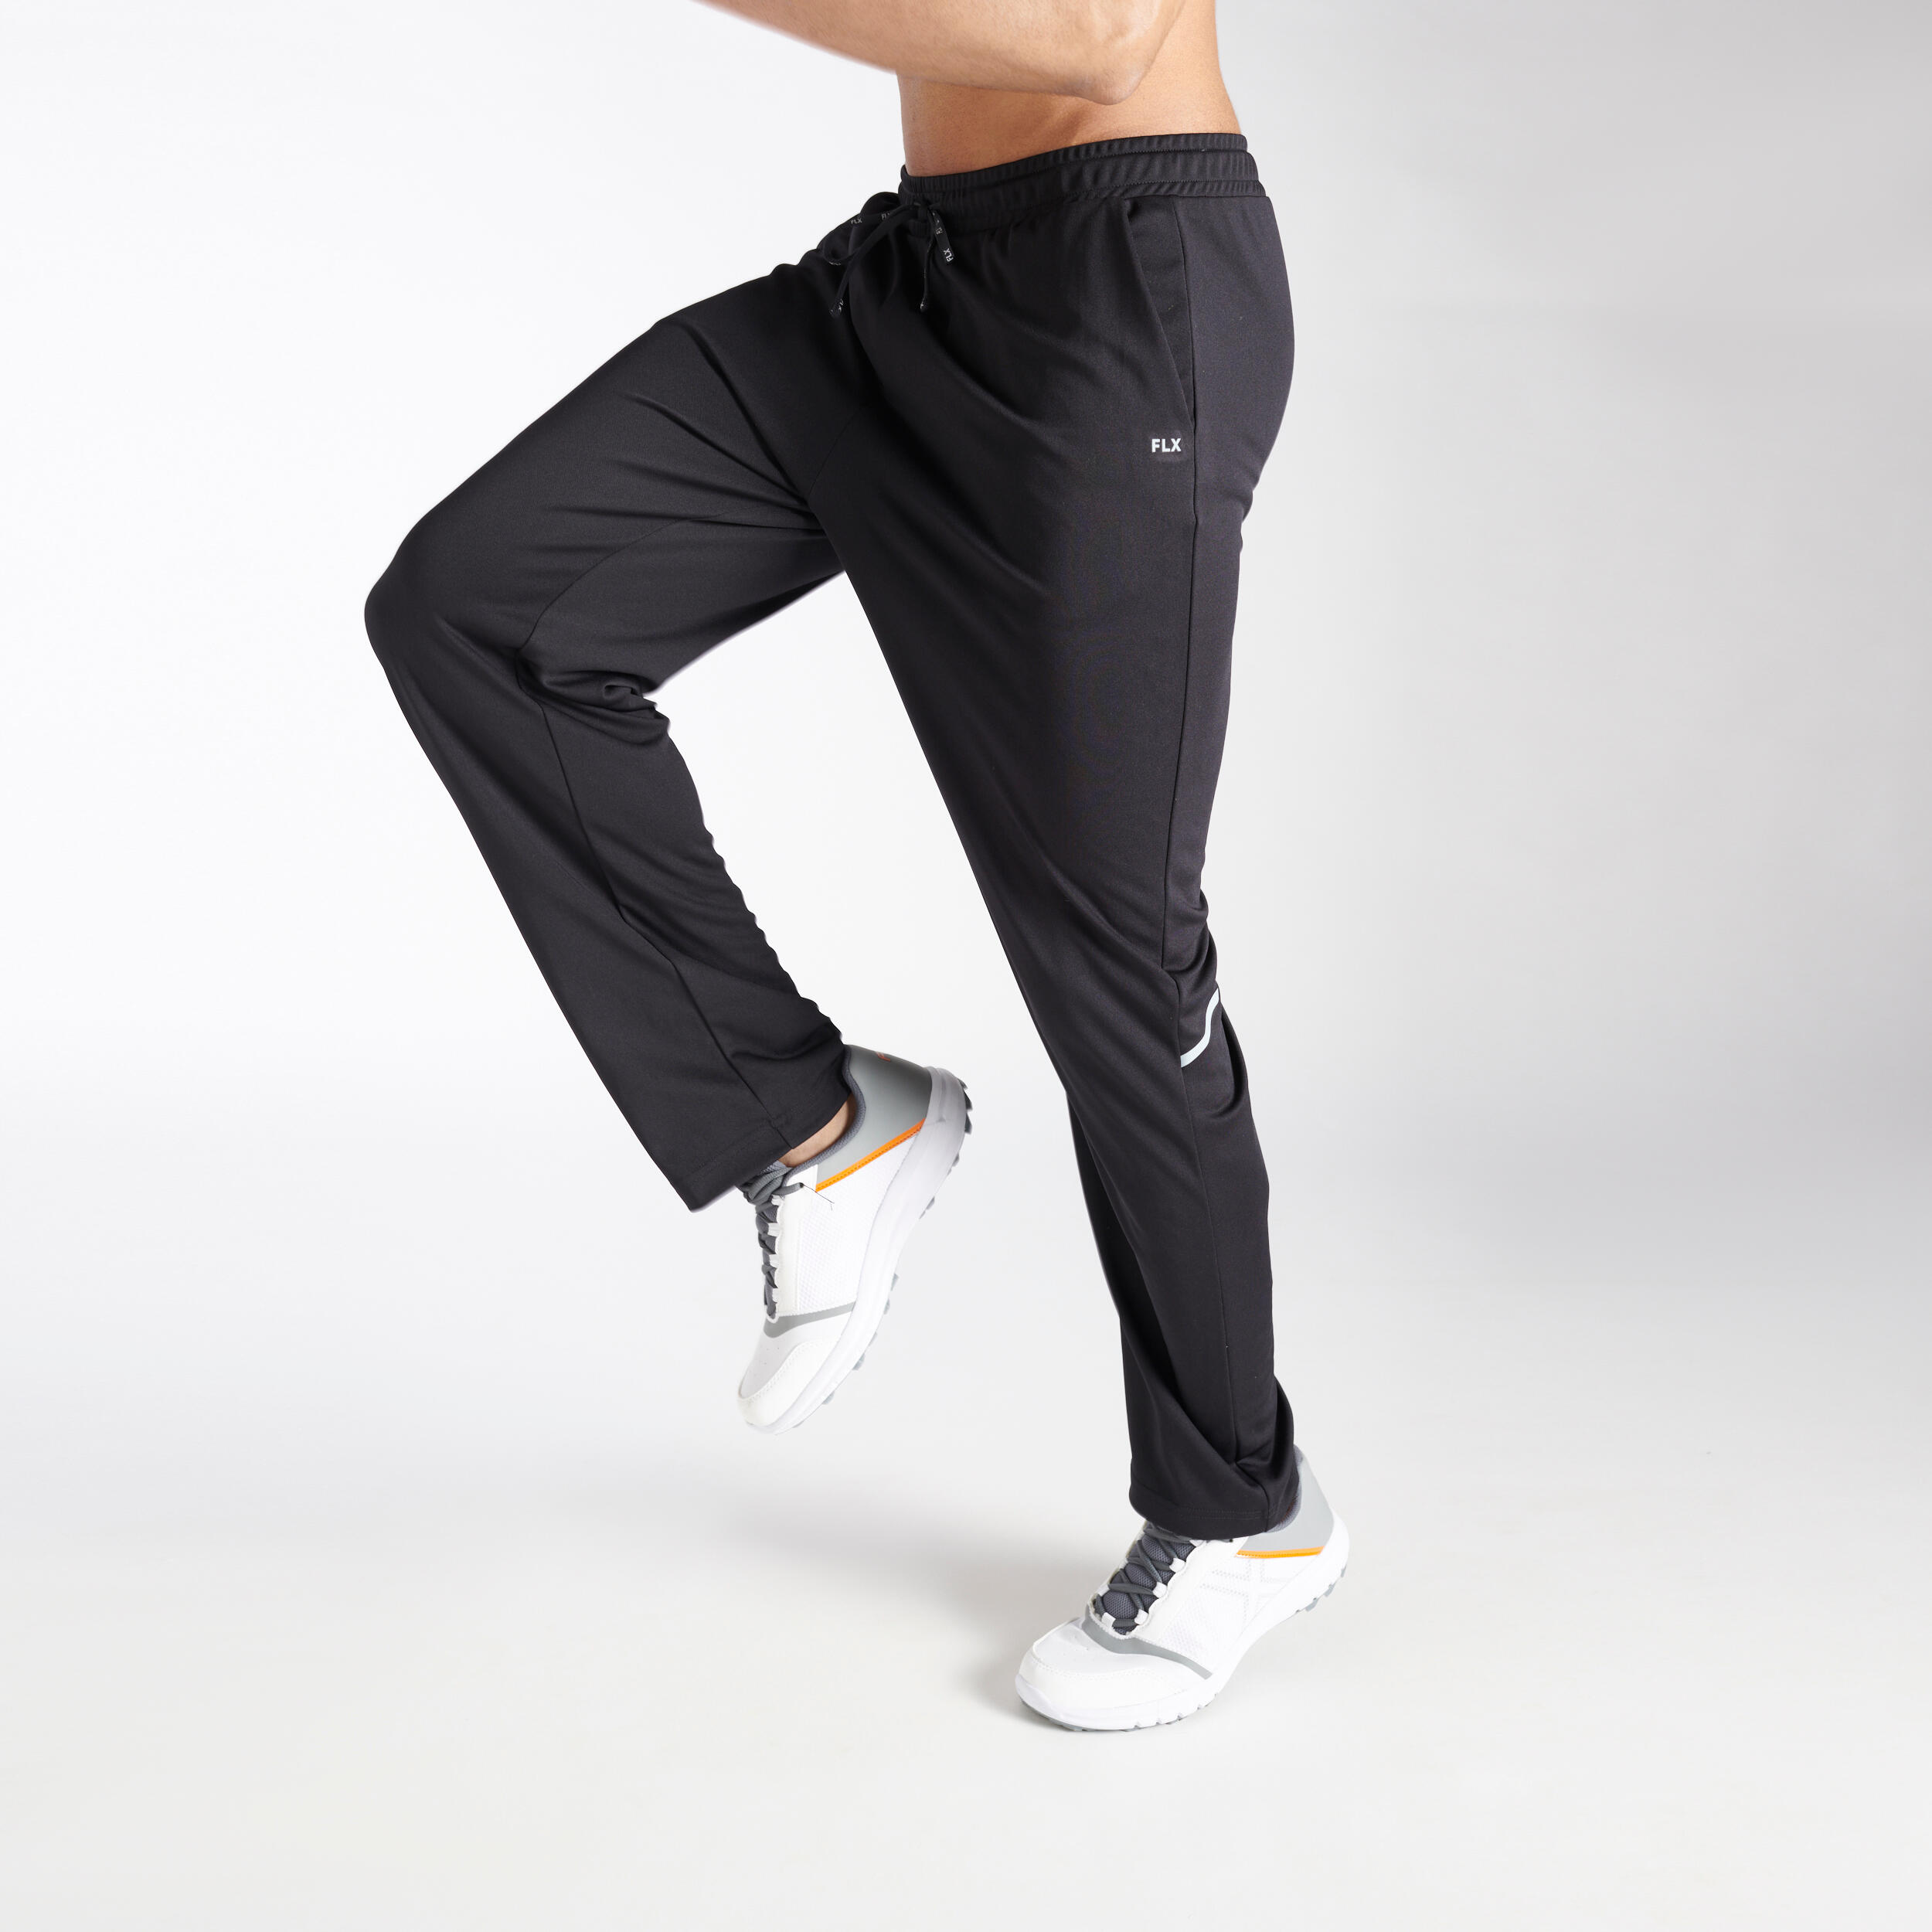 CRICKET TROUSER TAPERED TR 500  Black